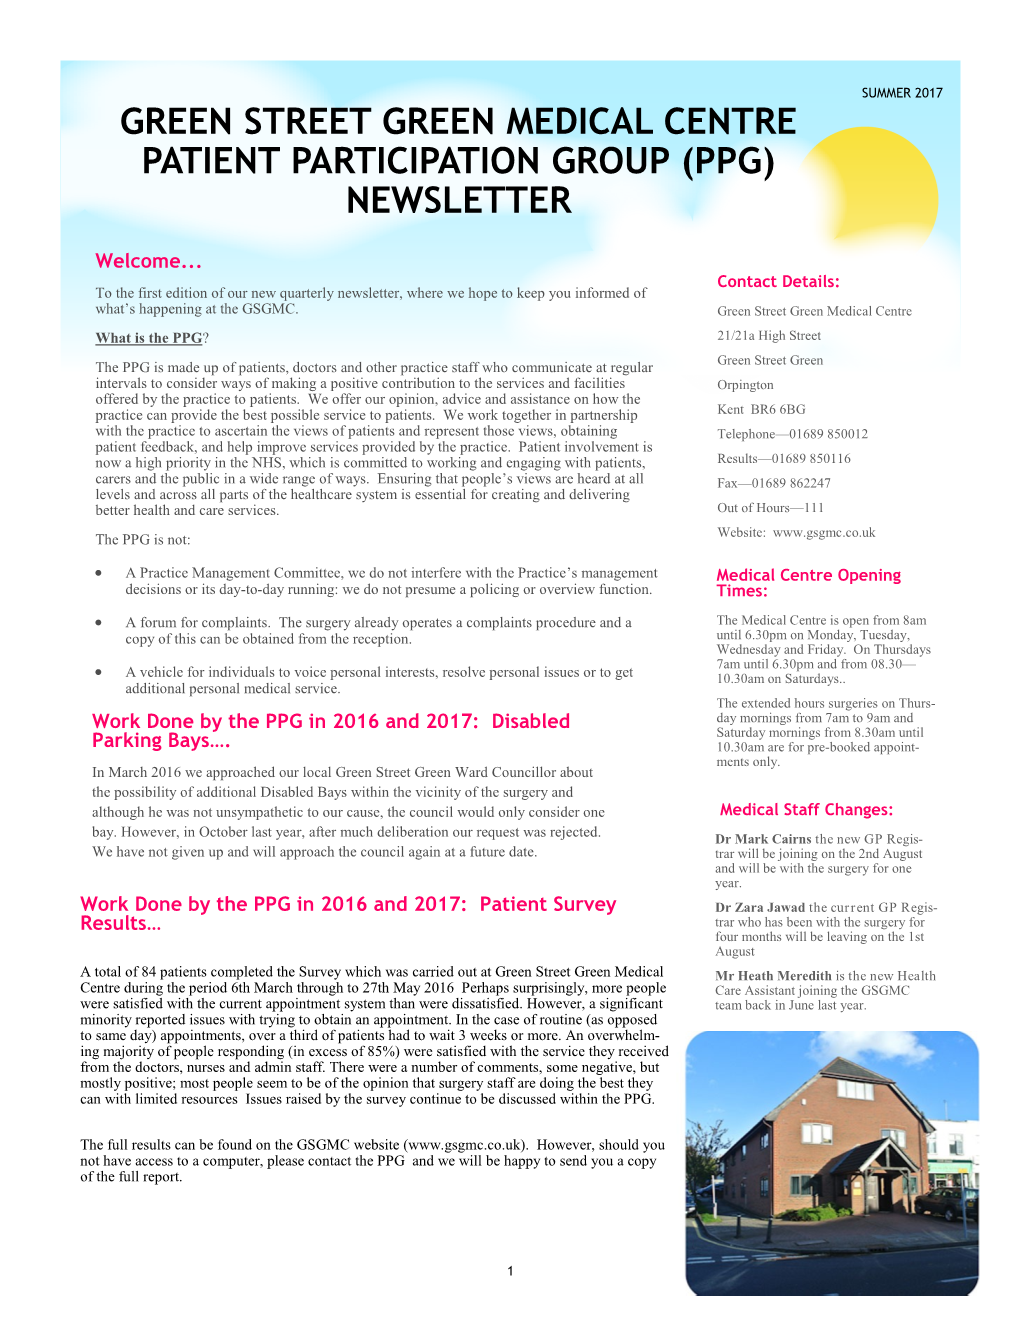 Green Street Green Medical Centre Patient Participation Group (Ppg) Newsletter